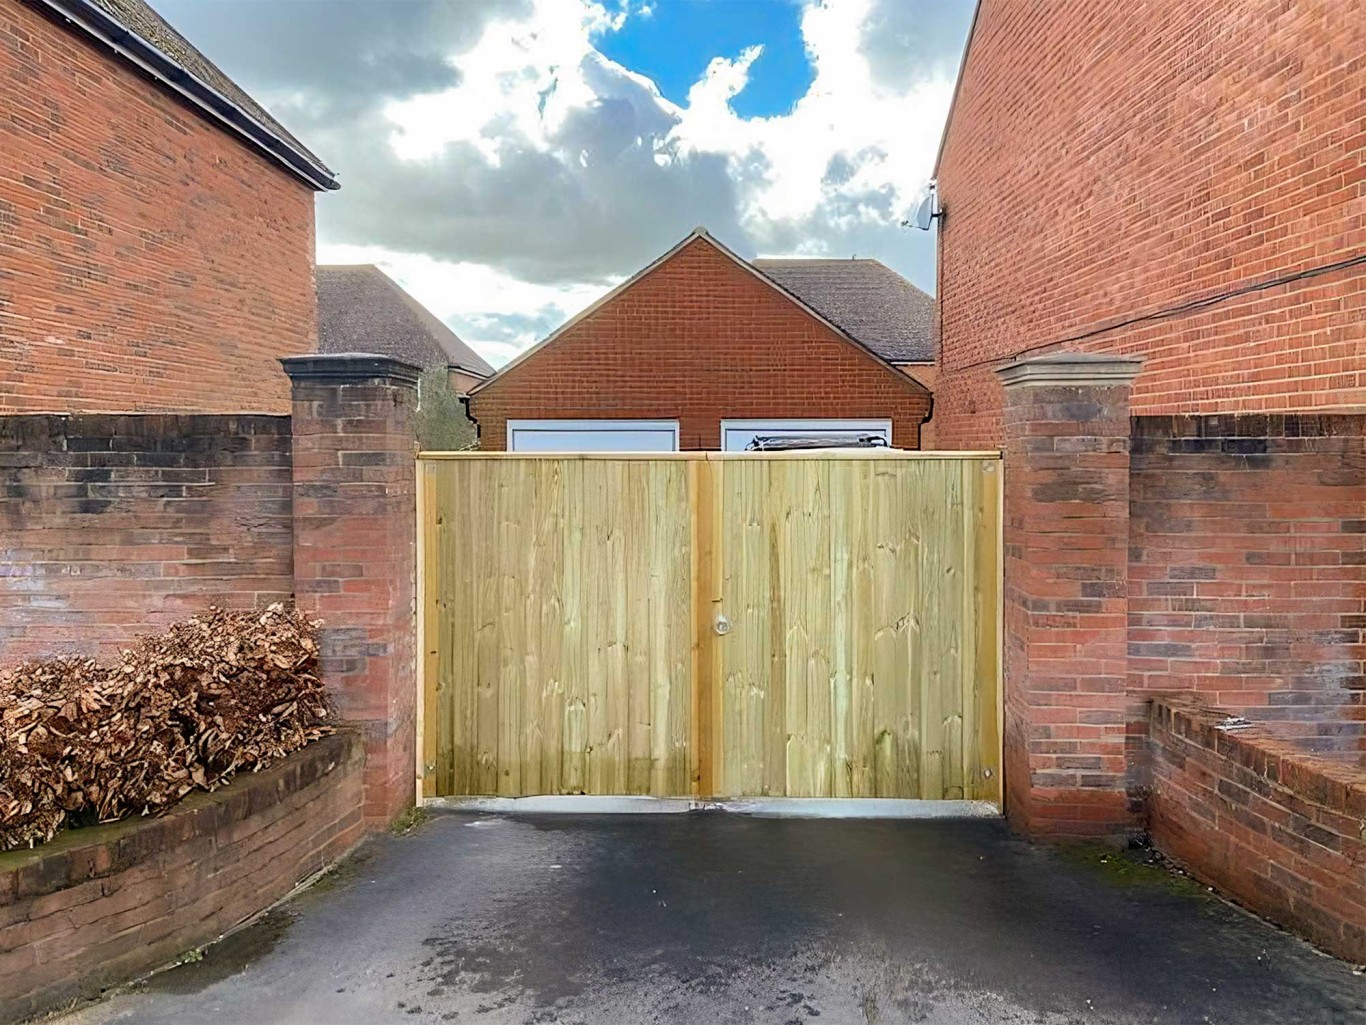 Large tongue and groove entrance gate in wood with brick walls either side.